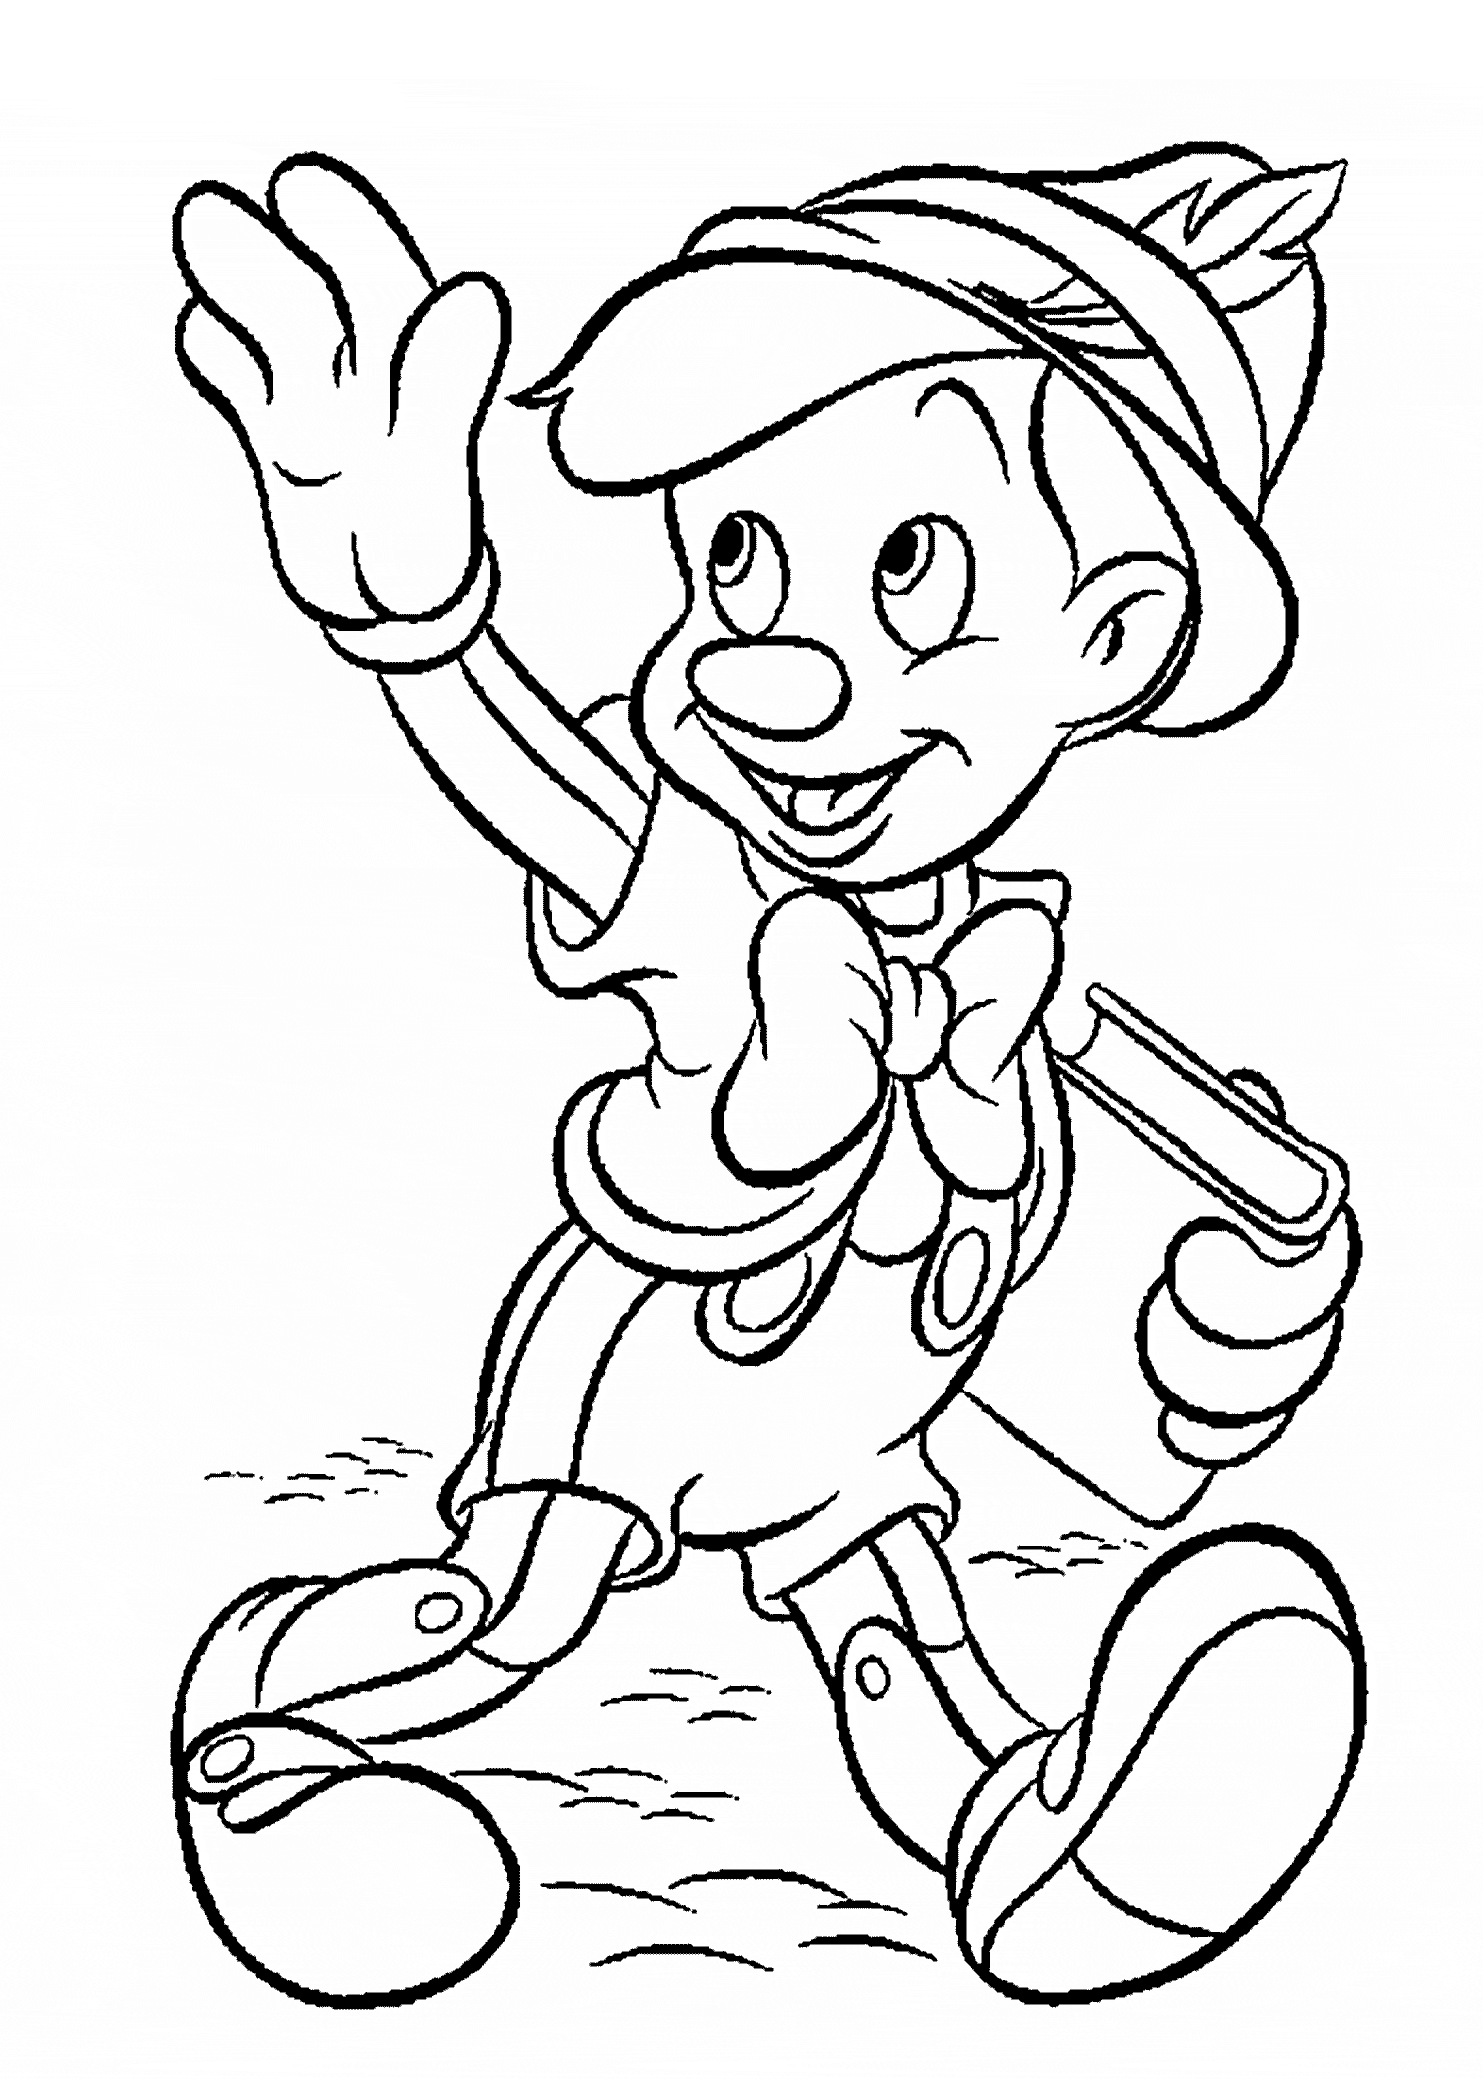 Pinocchio coloring pages to download and print for free